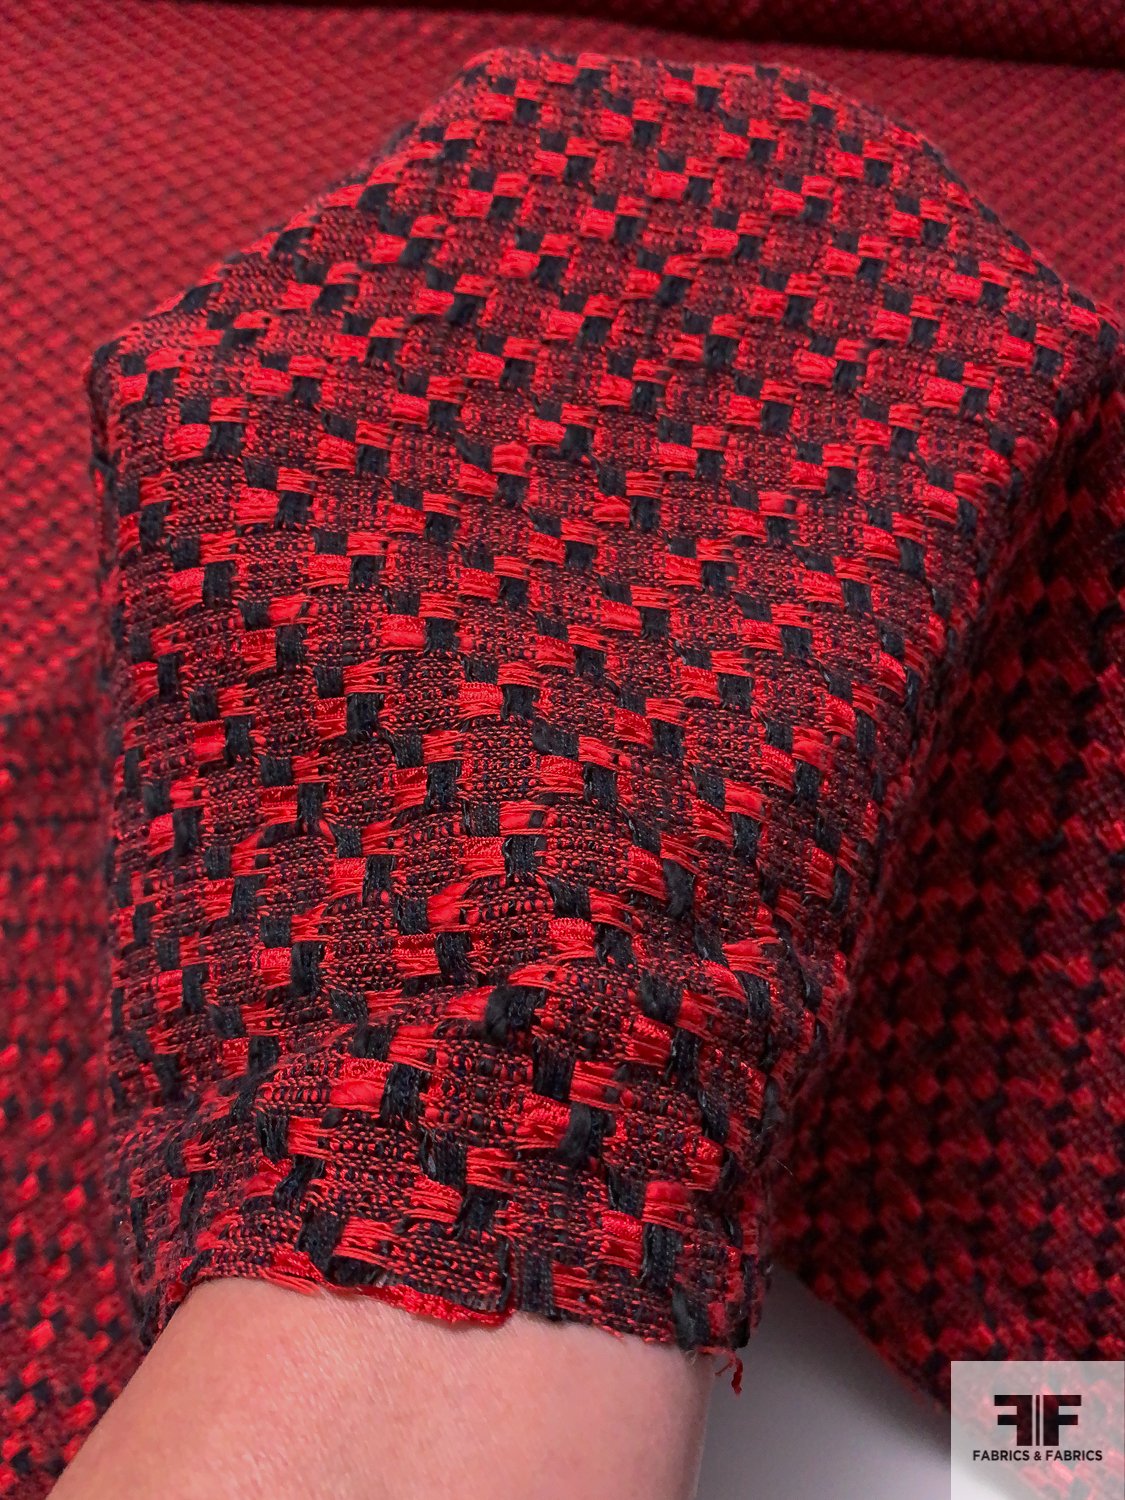 Made in England Cotton Blend Basketweave Tweed Suiting - Red / Black / White